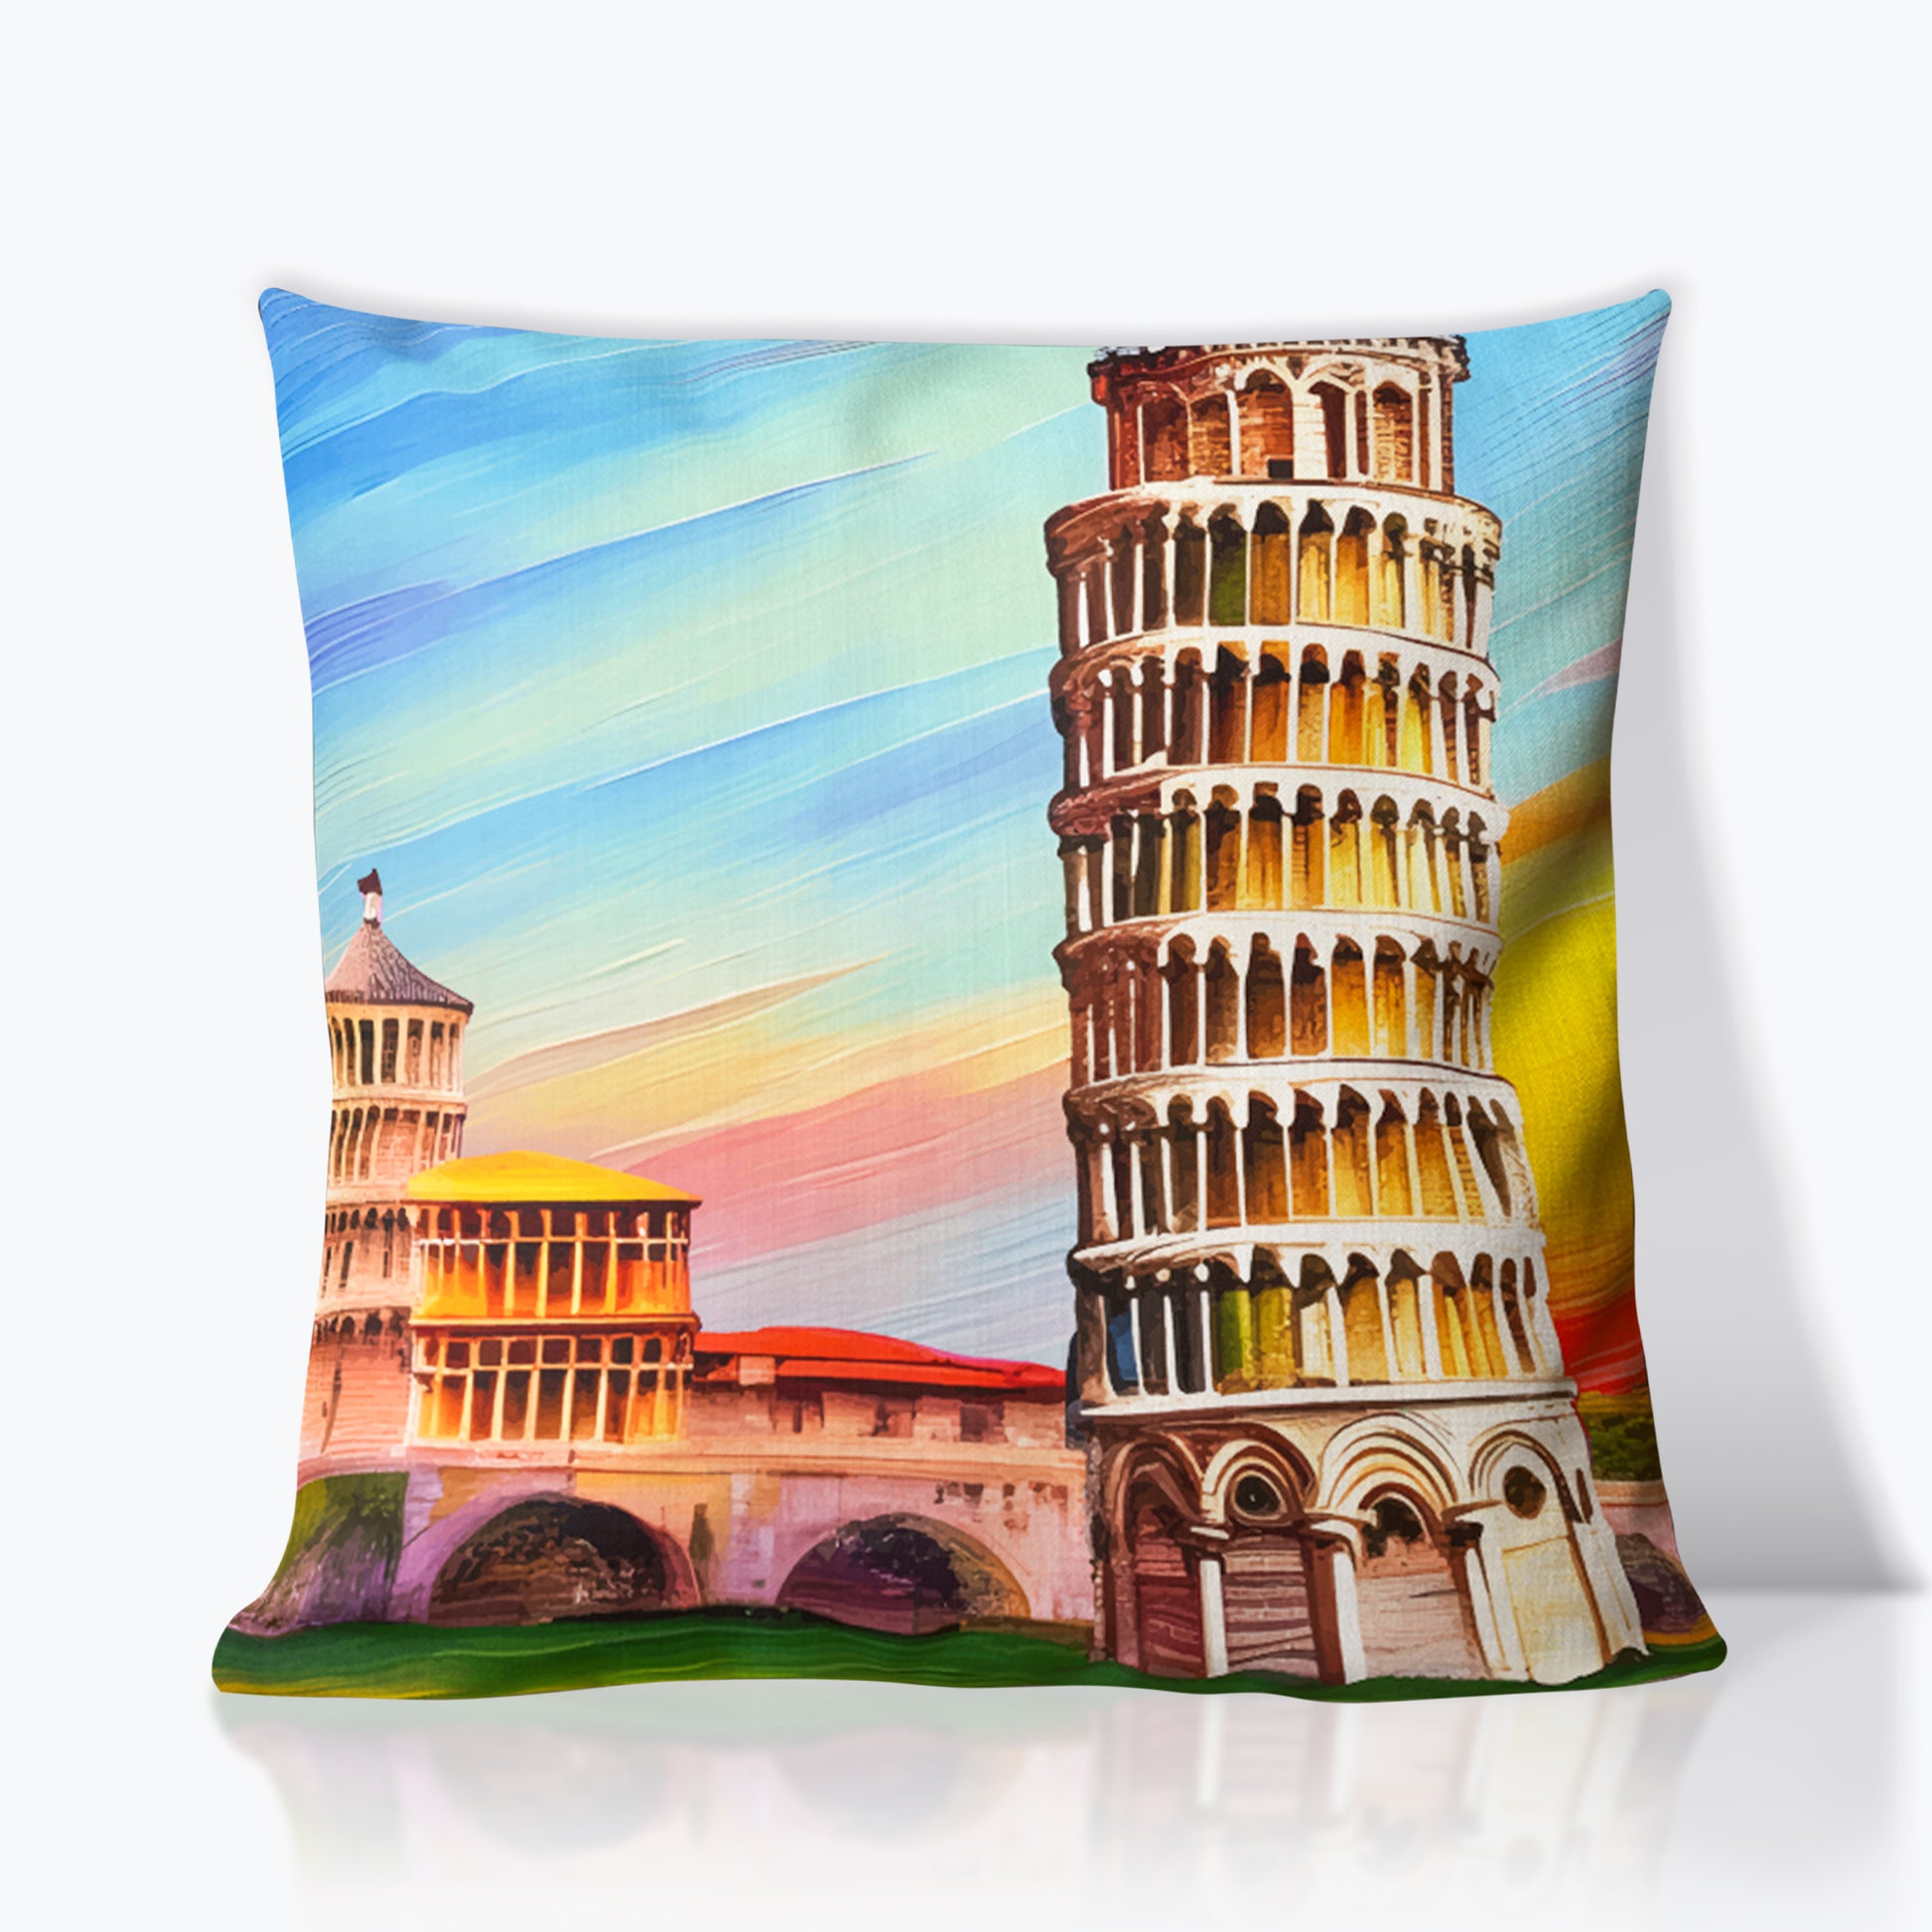 Premium Pillow - Pisa | Luxurious and comfortable accent for your home decor | Seepu